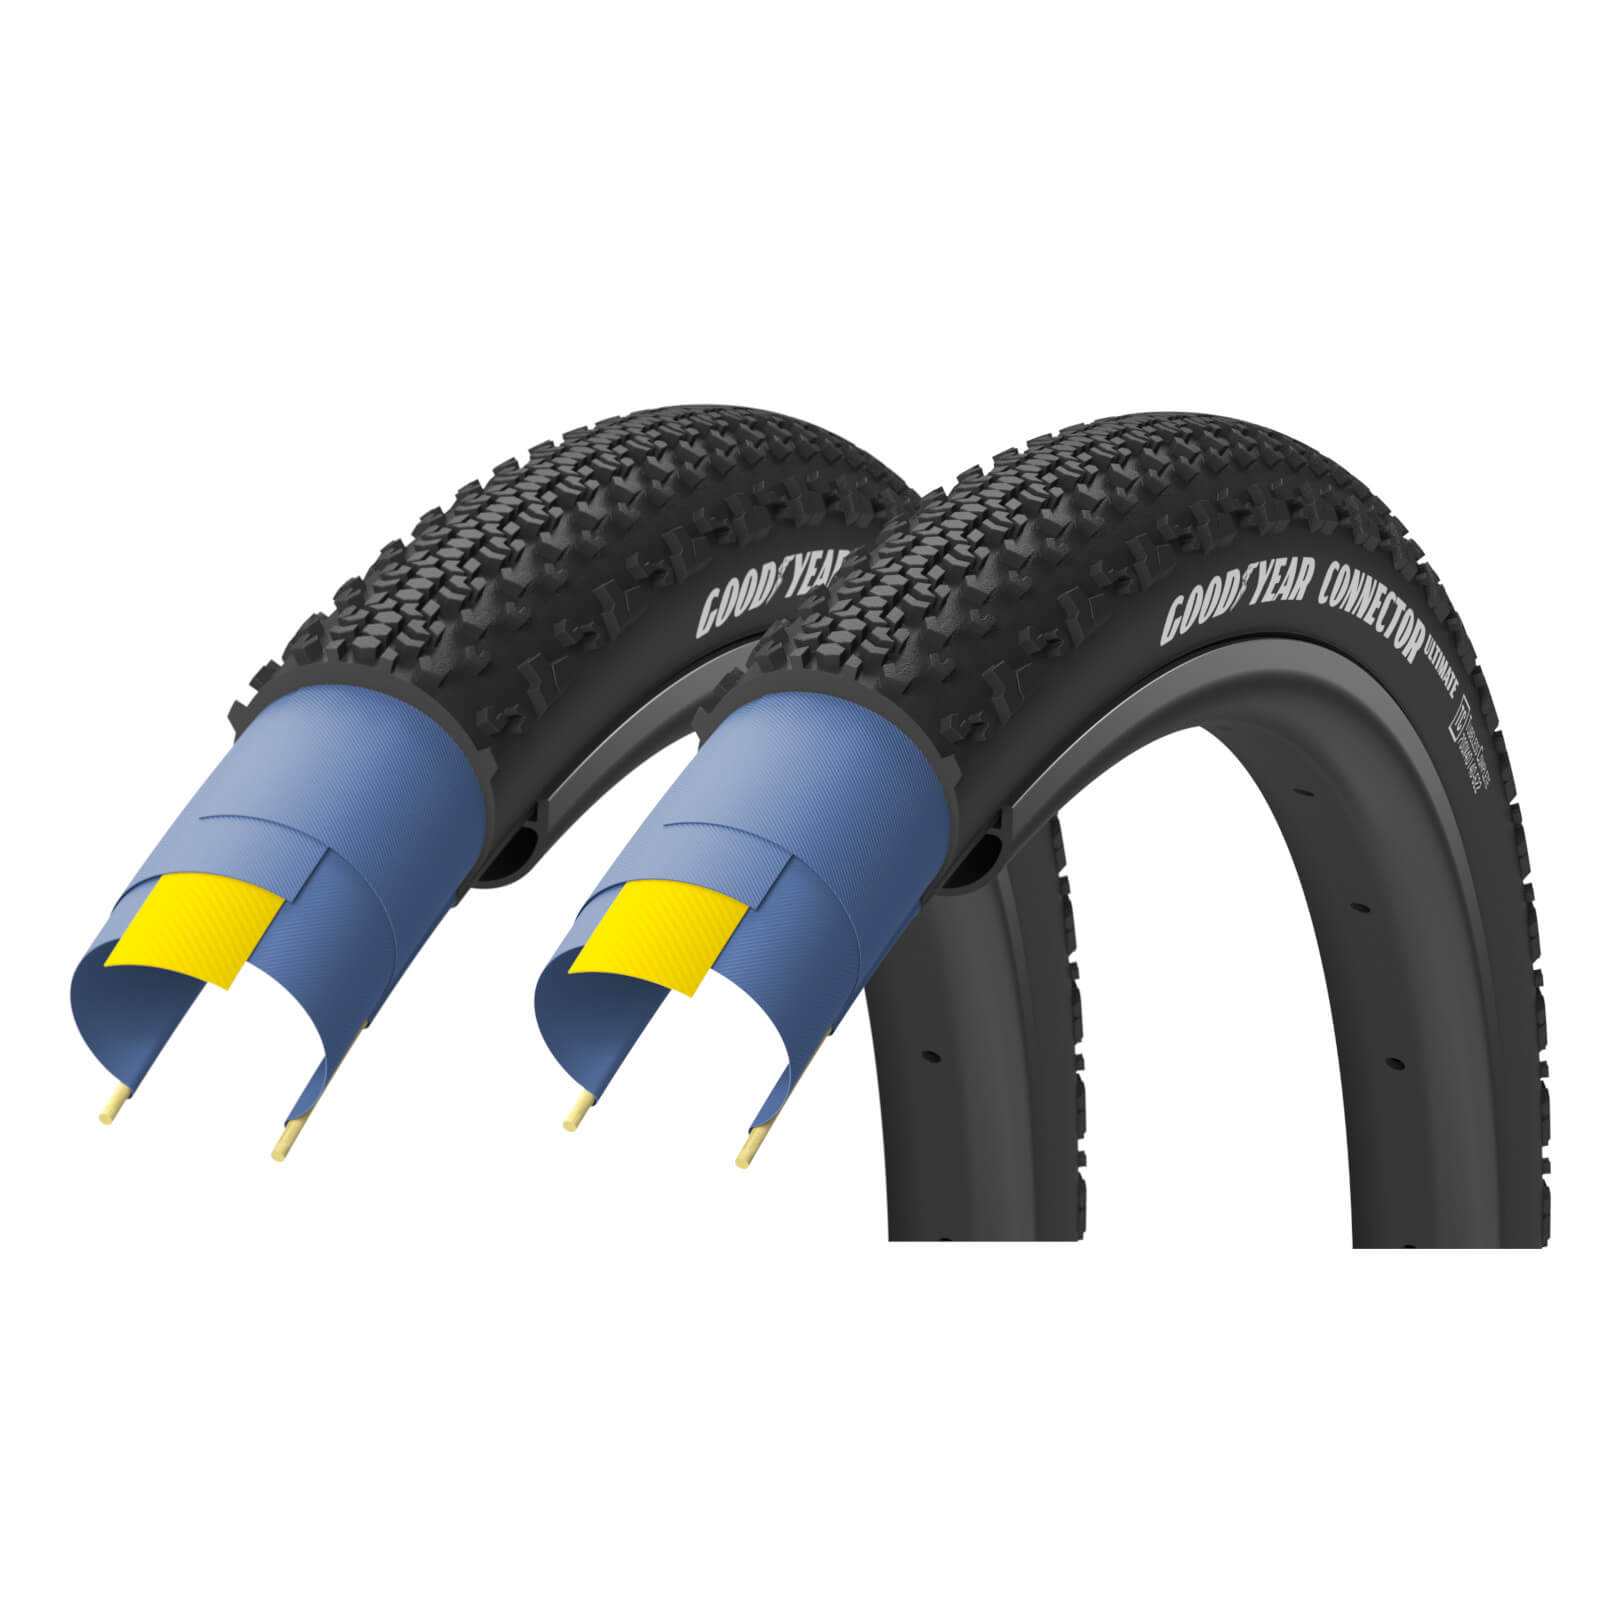 Goodyear Connector Ultimate A/T Tubeless Gravel Tyre Twin Pack - 700c x 50mm - Black